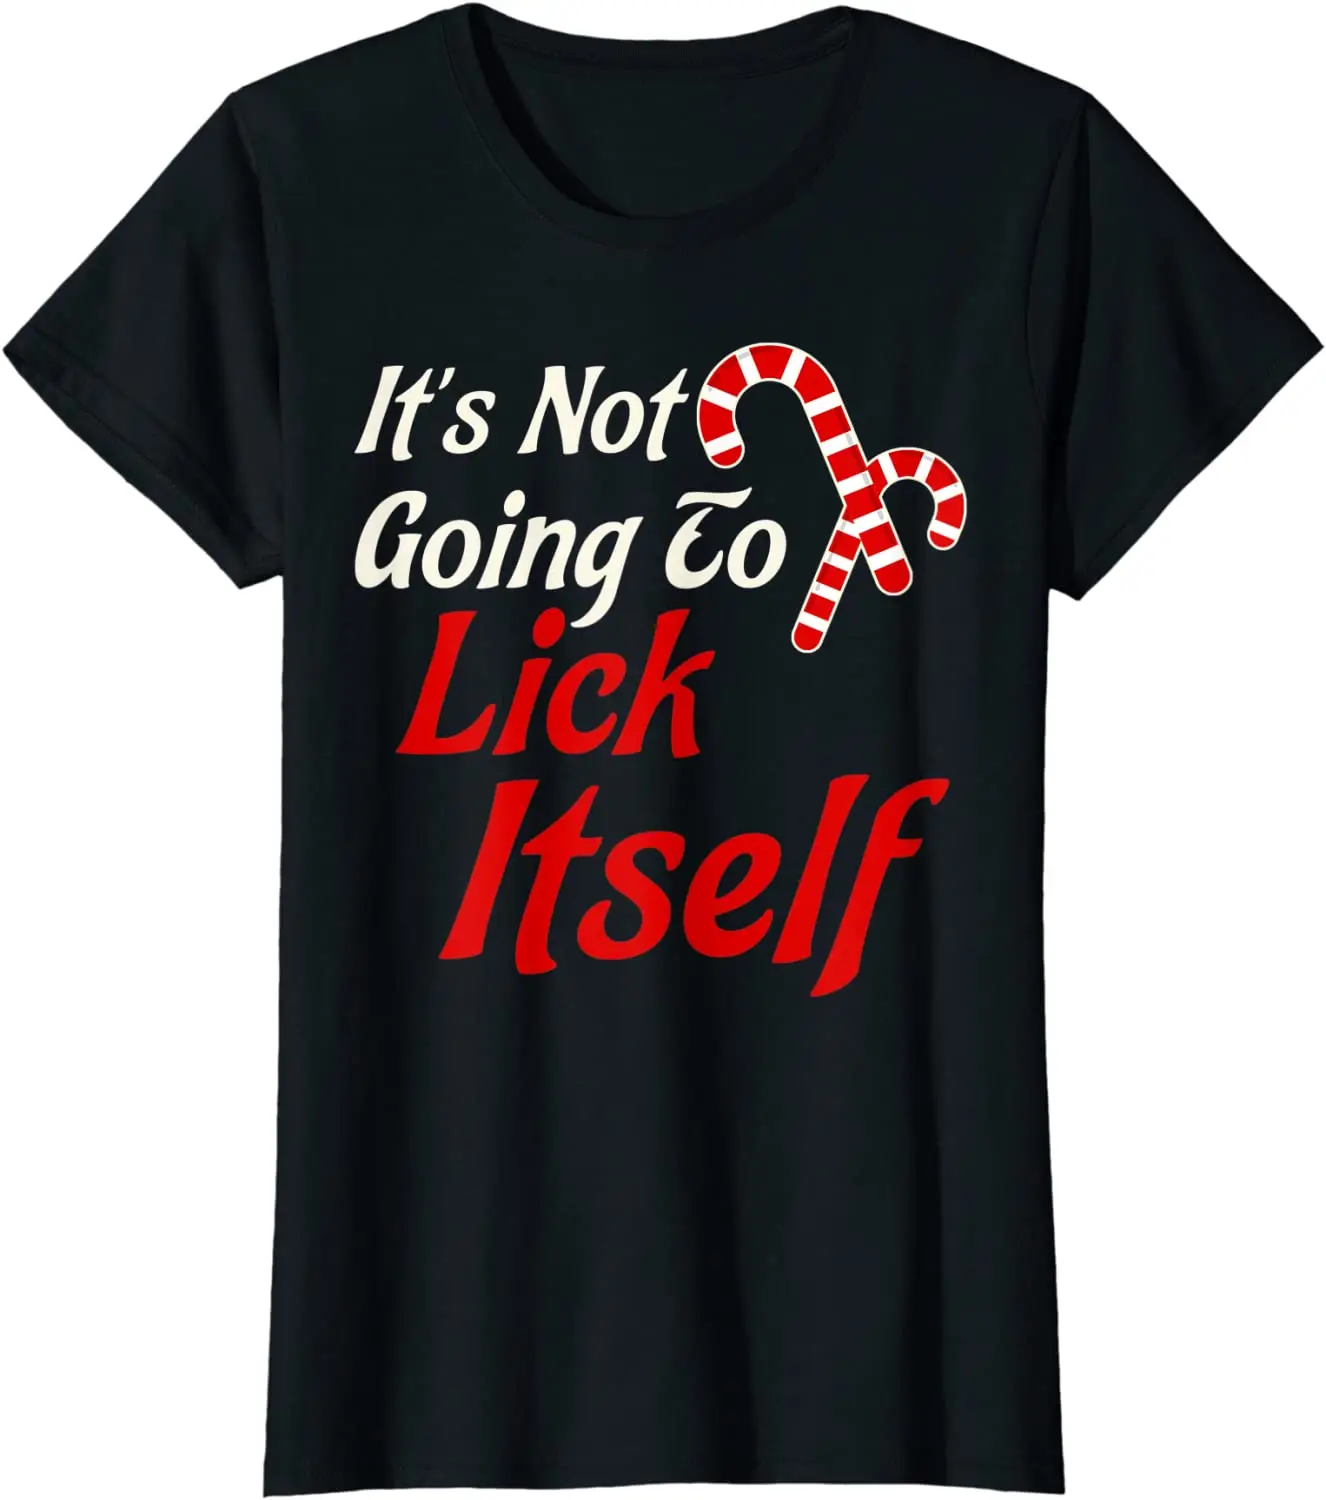 

It's Not Going to Lick Itself Adult Funny Christmas T-Shirt